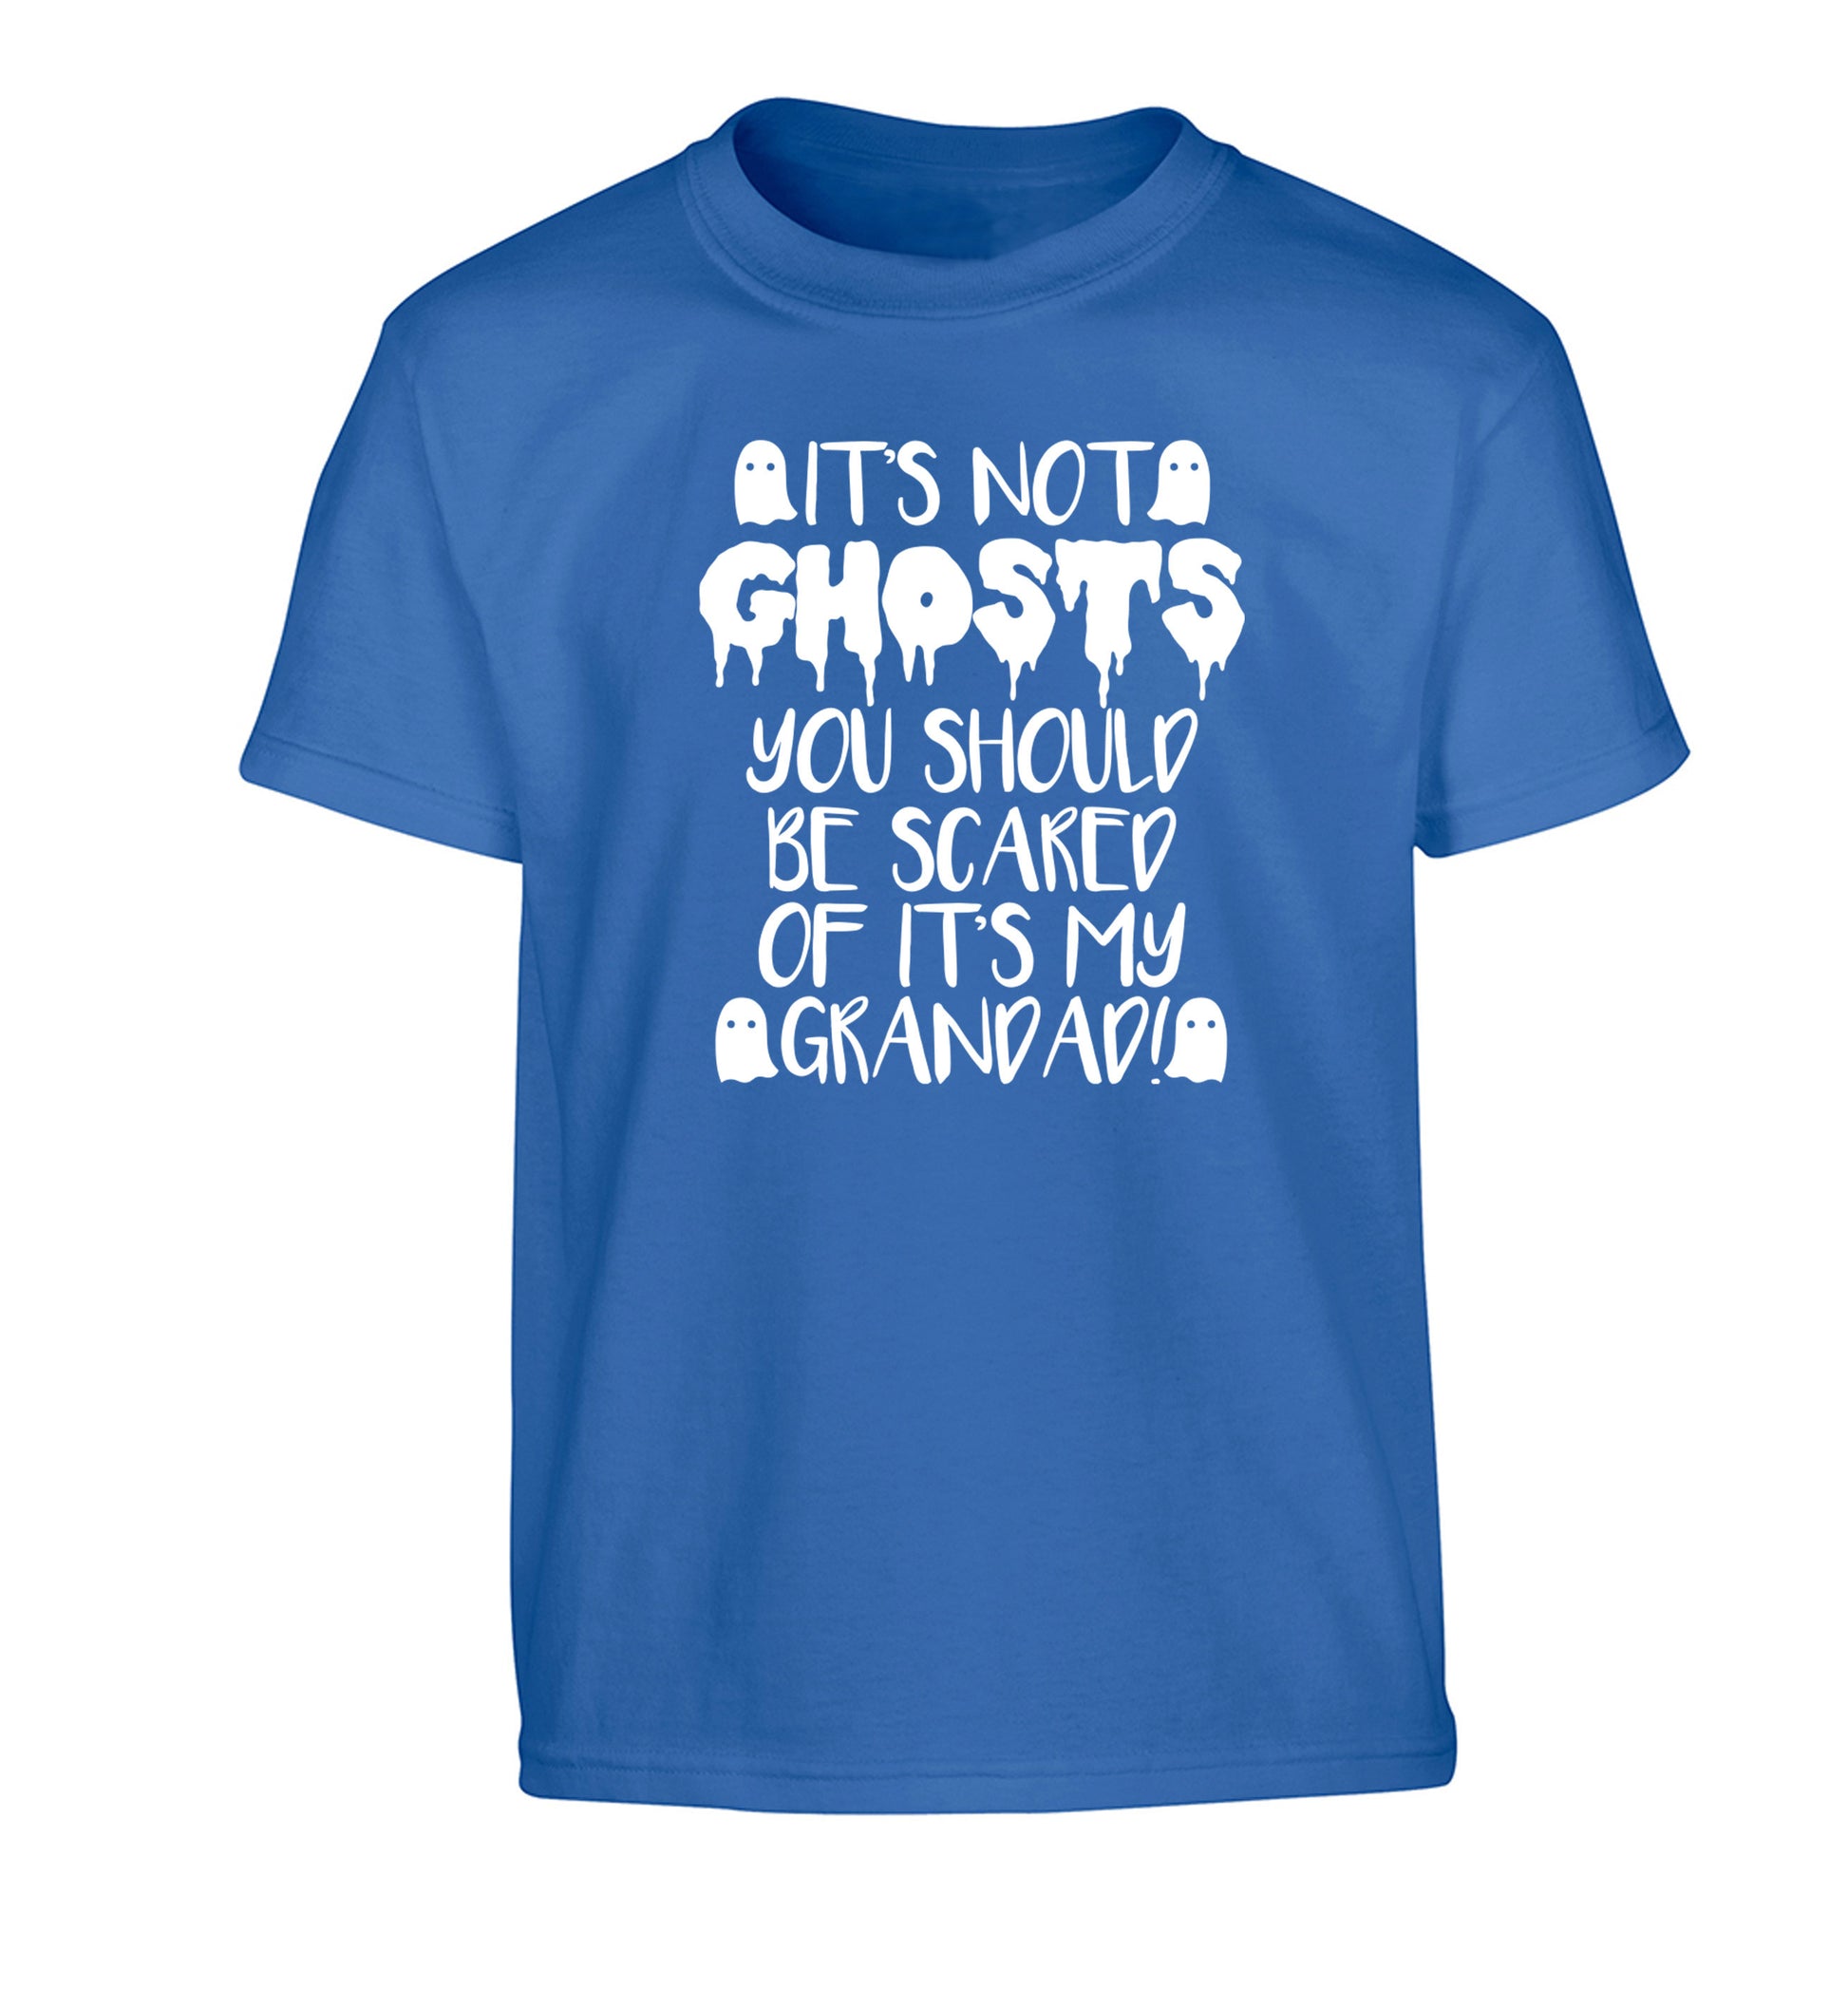 It's not ghosts you should be scared of it's my grandad! Children's blue Tshirt 12-14 Years